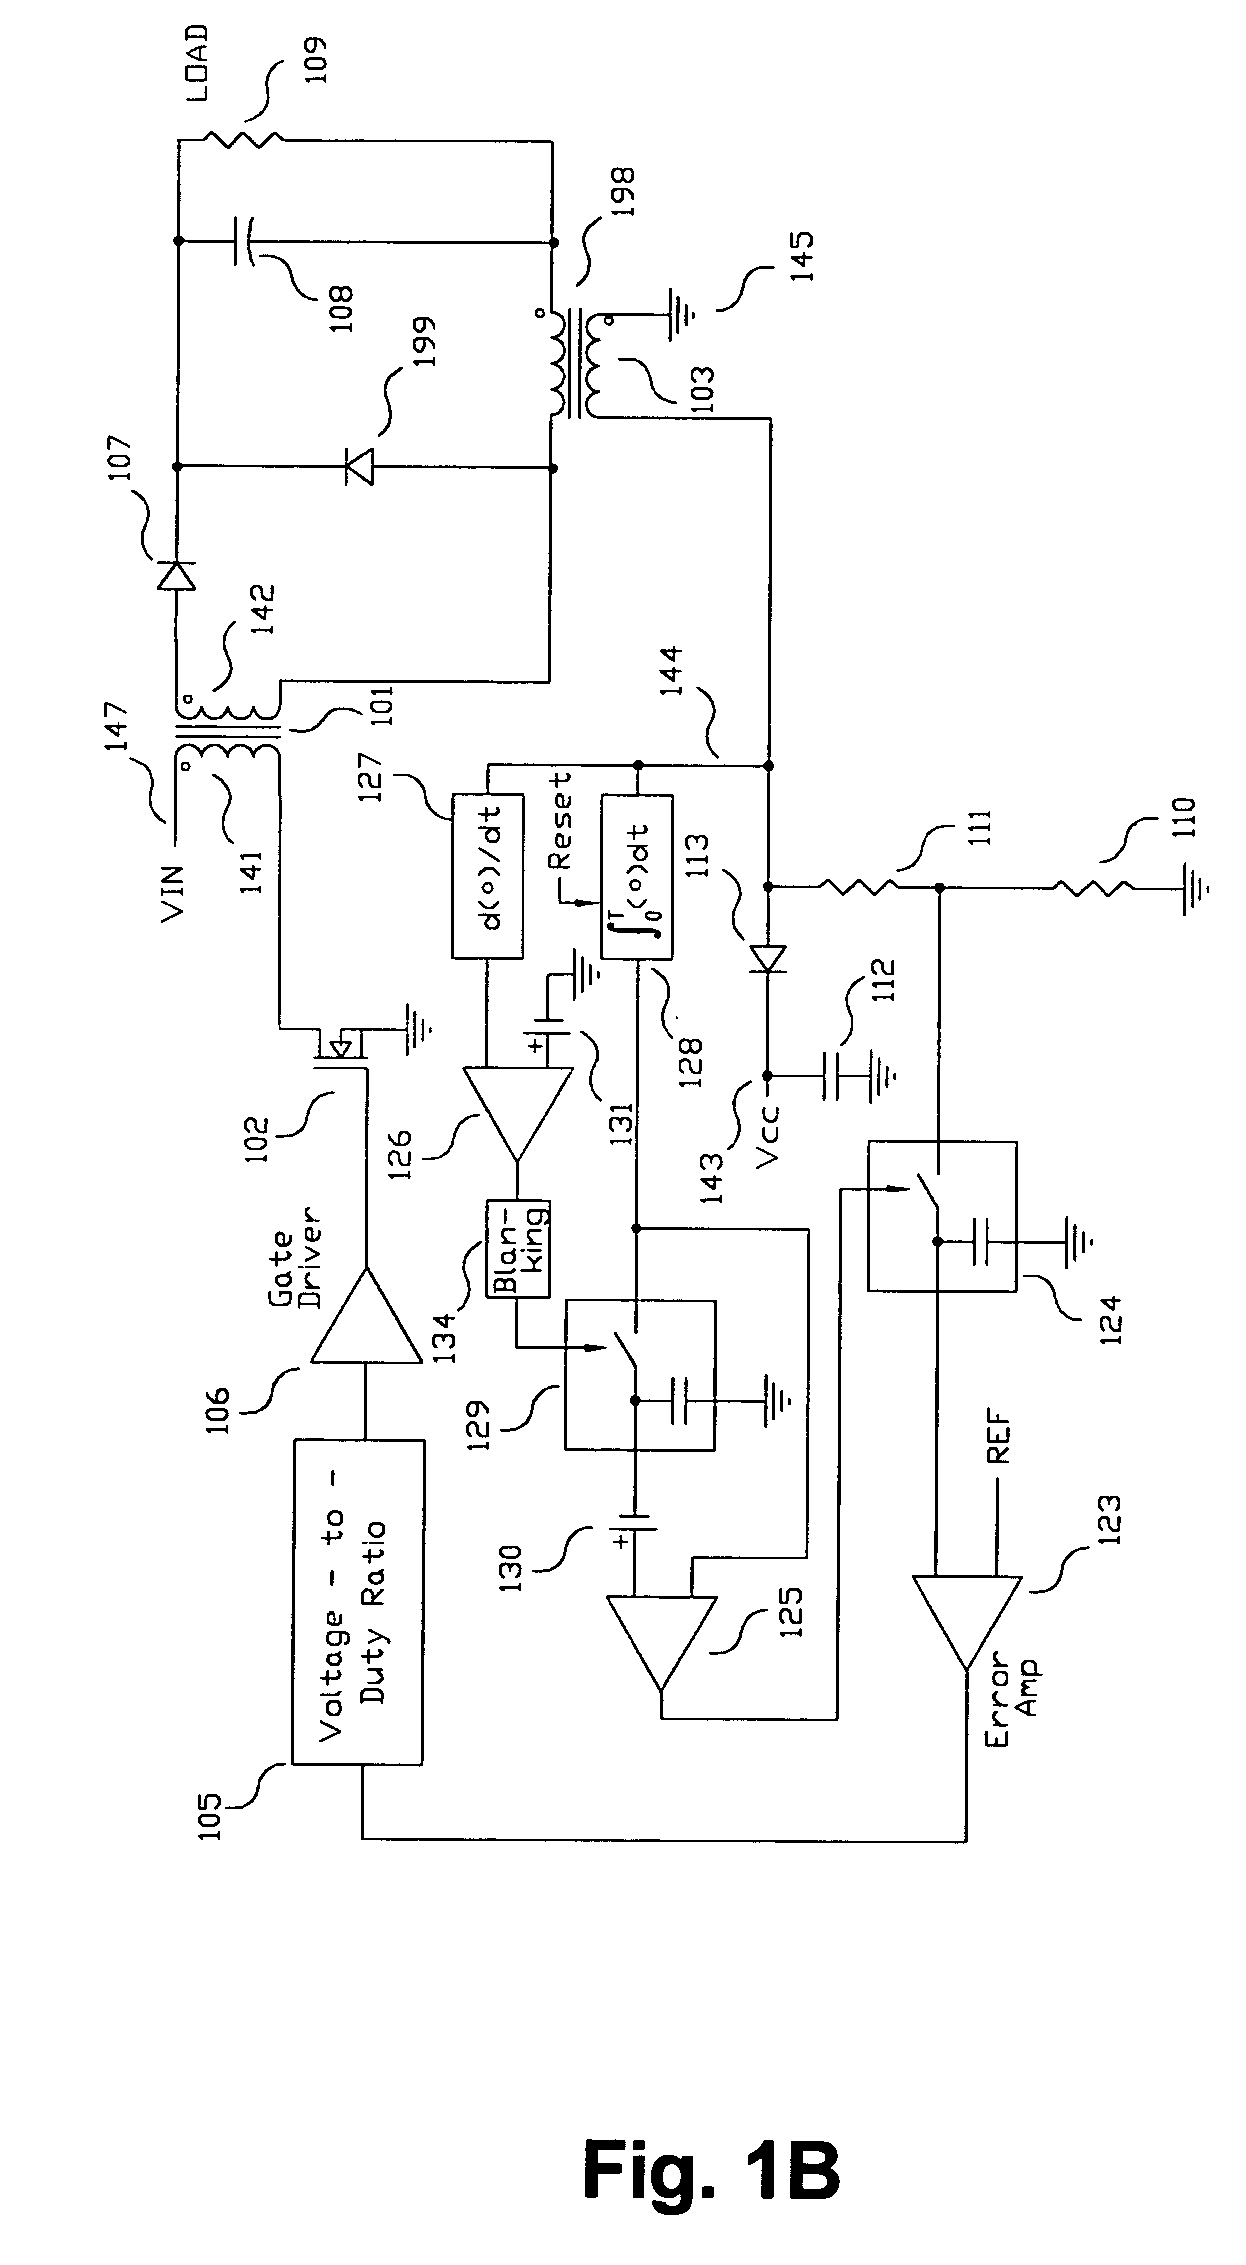 Switching power converter and method of controlling output voltage thereof using predictive sensing of magnetic flux